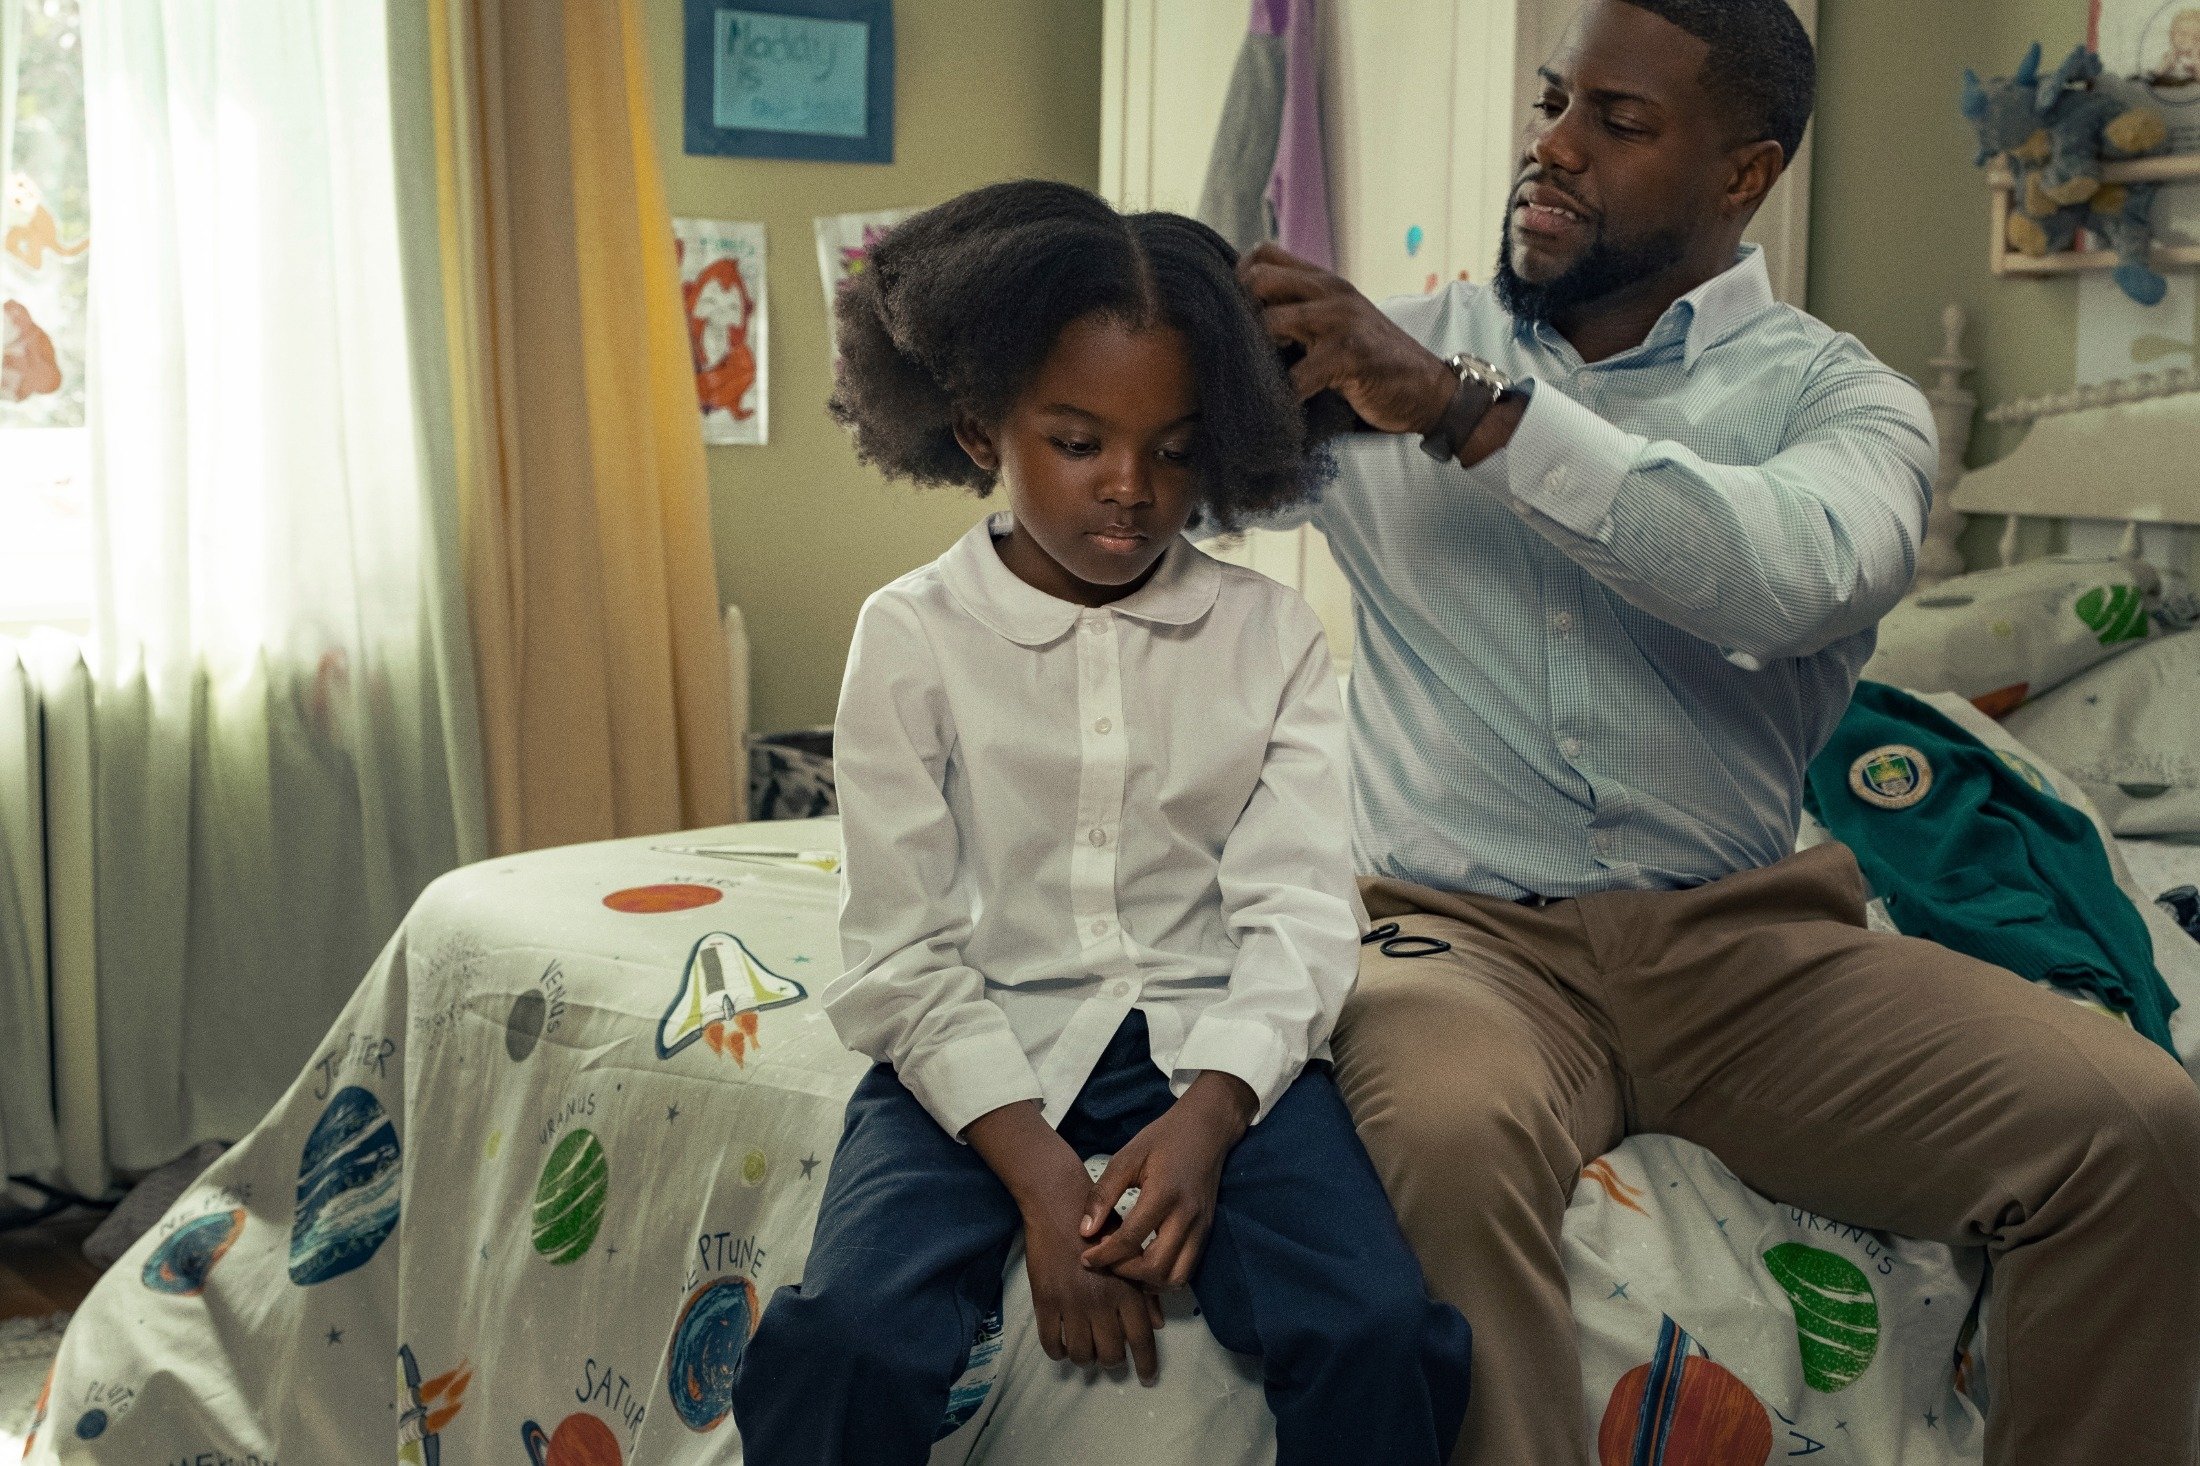 Melody Hurd (L) sits on a bed next to Kevin Hart who curbs her hair, in a scene from the movie "Fatherhood." (Netflix via AP)